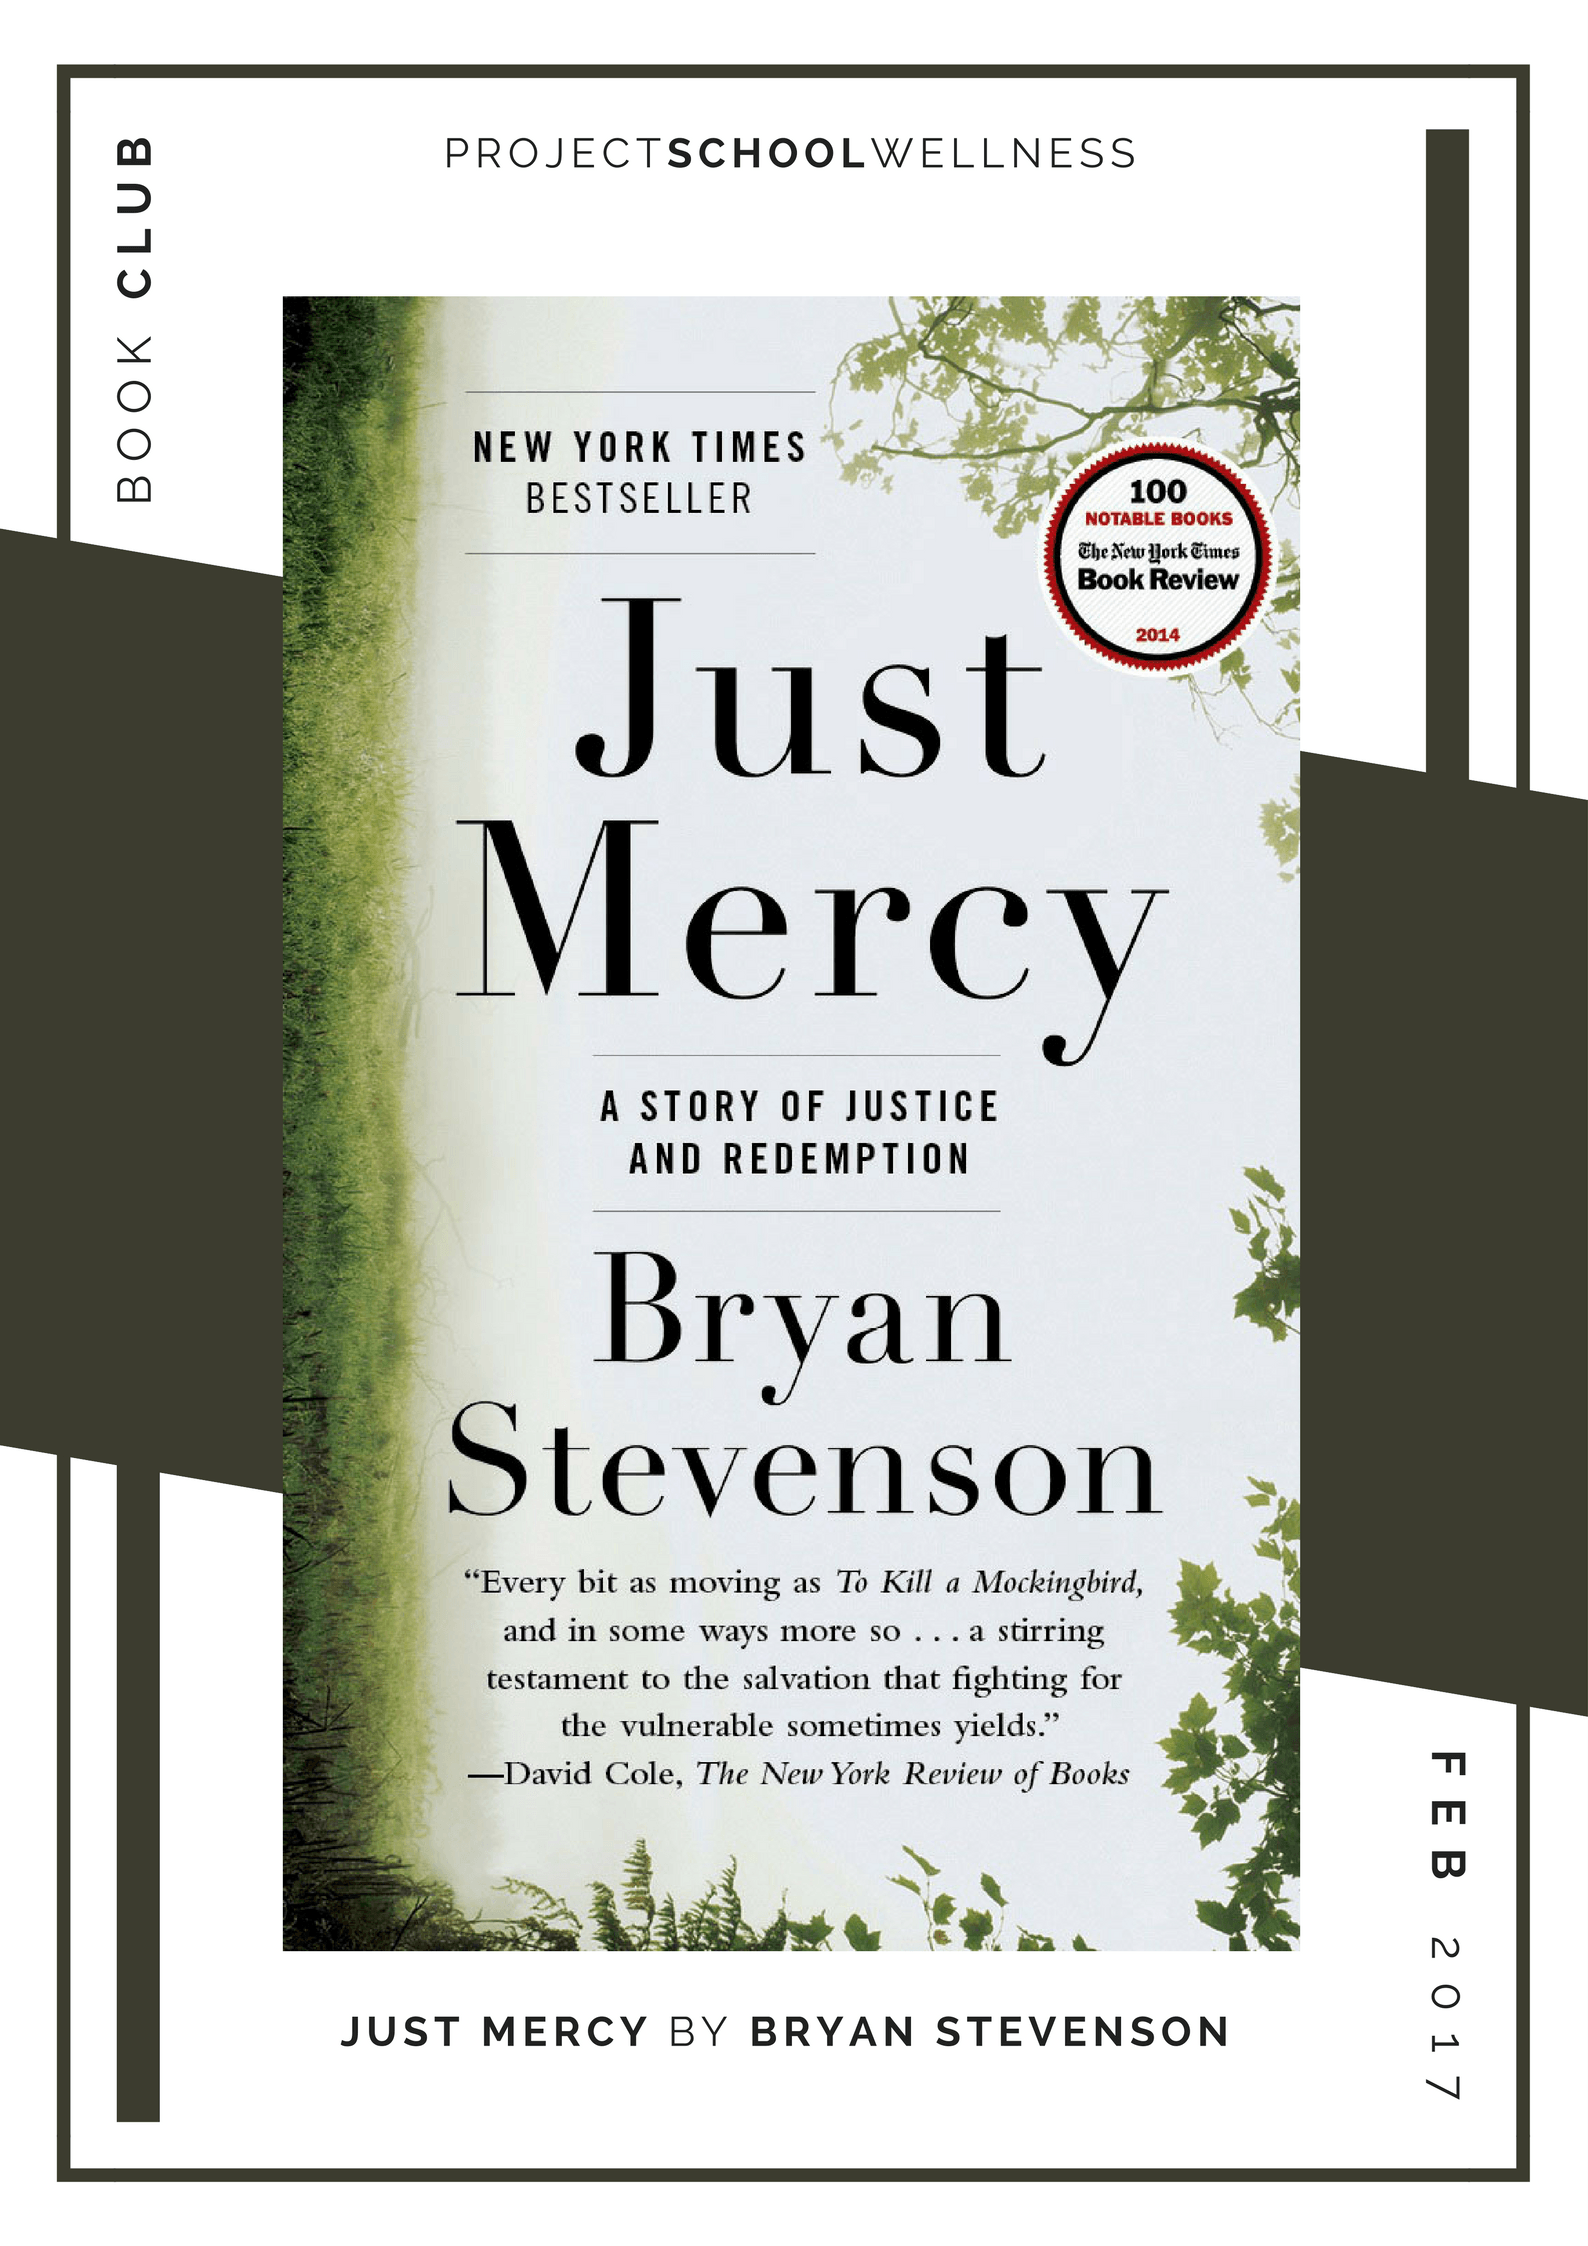 Project School Wellness book club. A list of must read books for teachers and parents! Each month Janelle from Project School Wellness her most current reads. Take a look at the criminal justice system with Bryan Stevenson's book, Just Mercy.